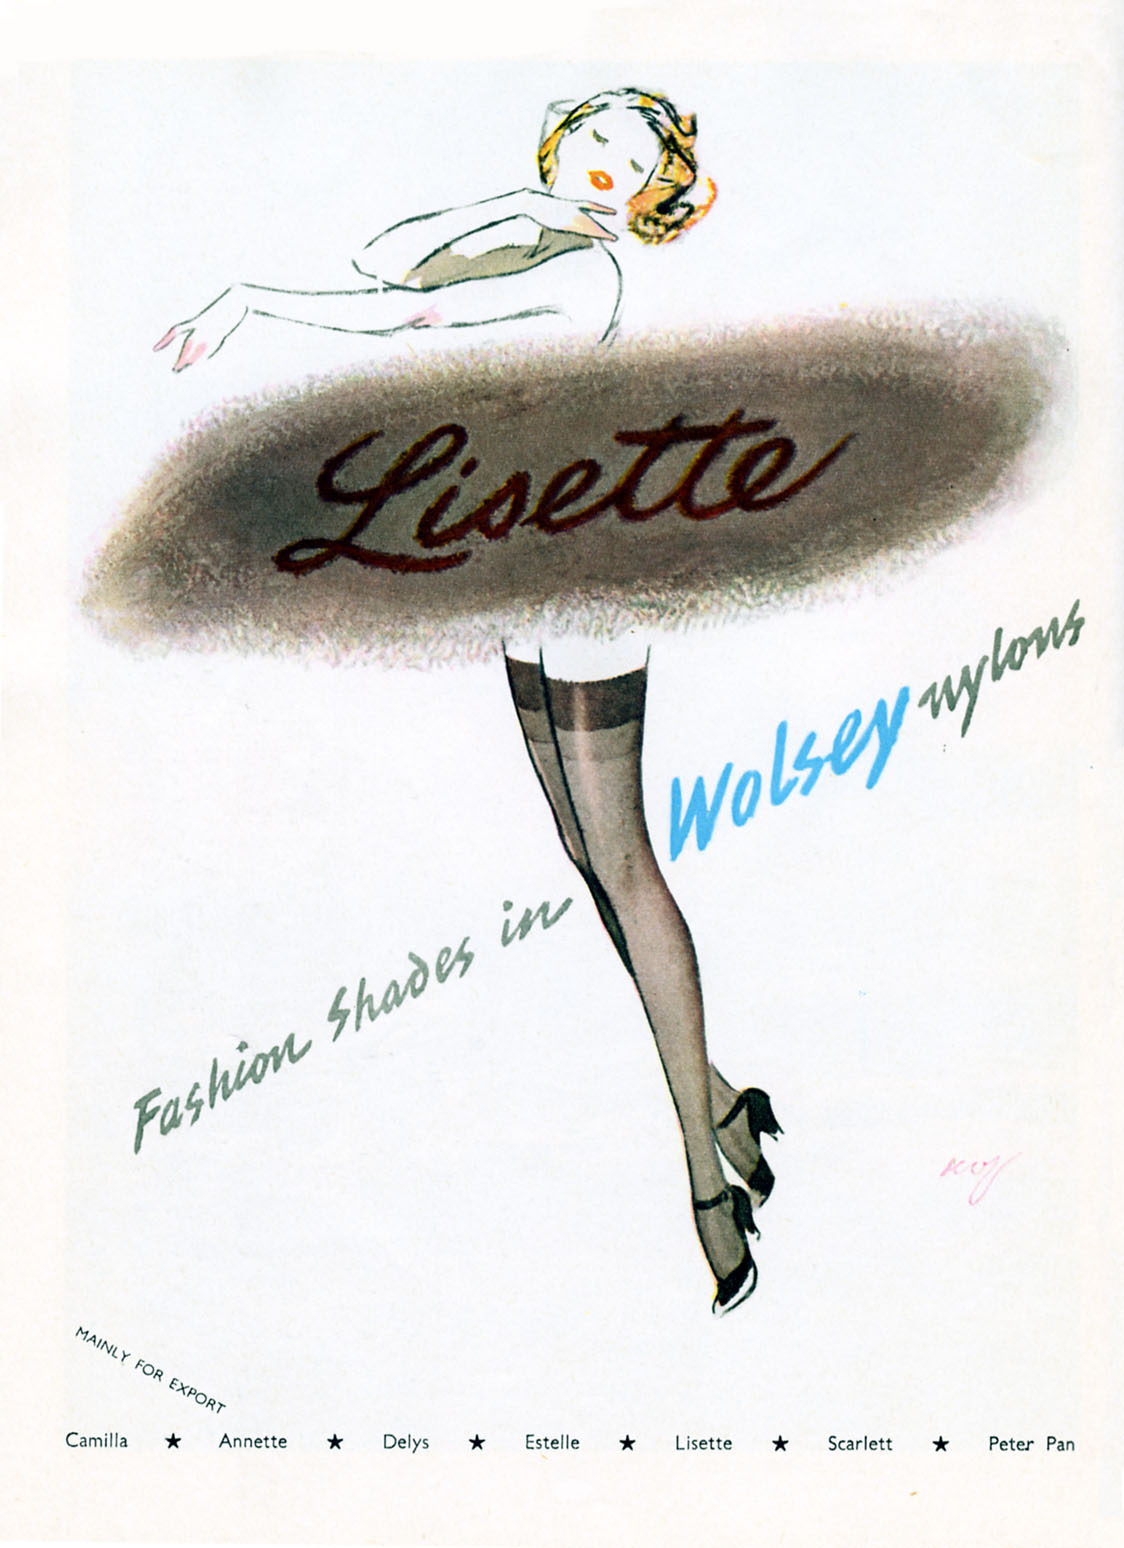 Lingerie ads: From modest beginnings to immodest modern times